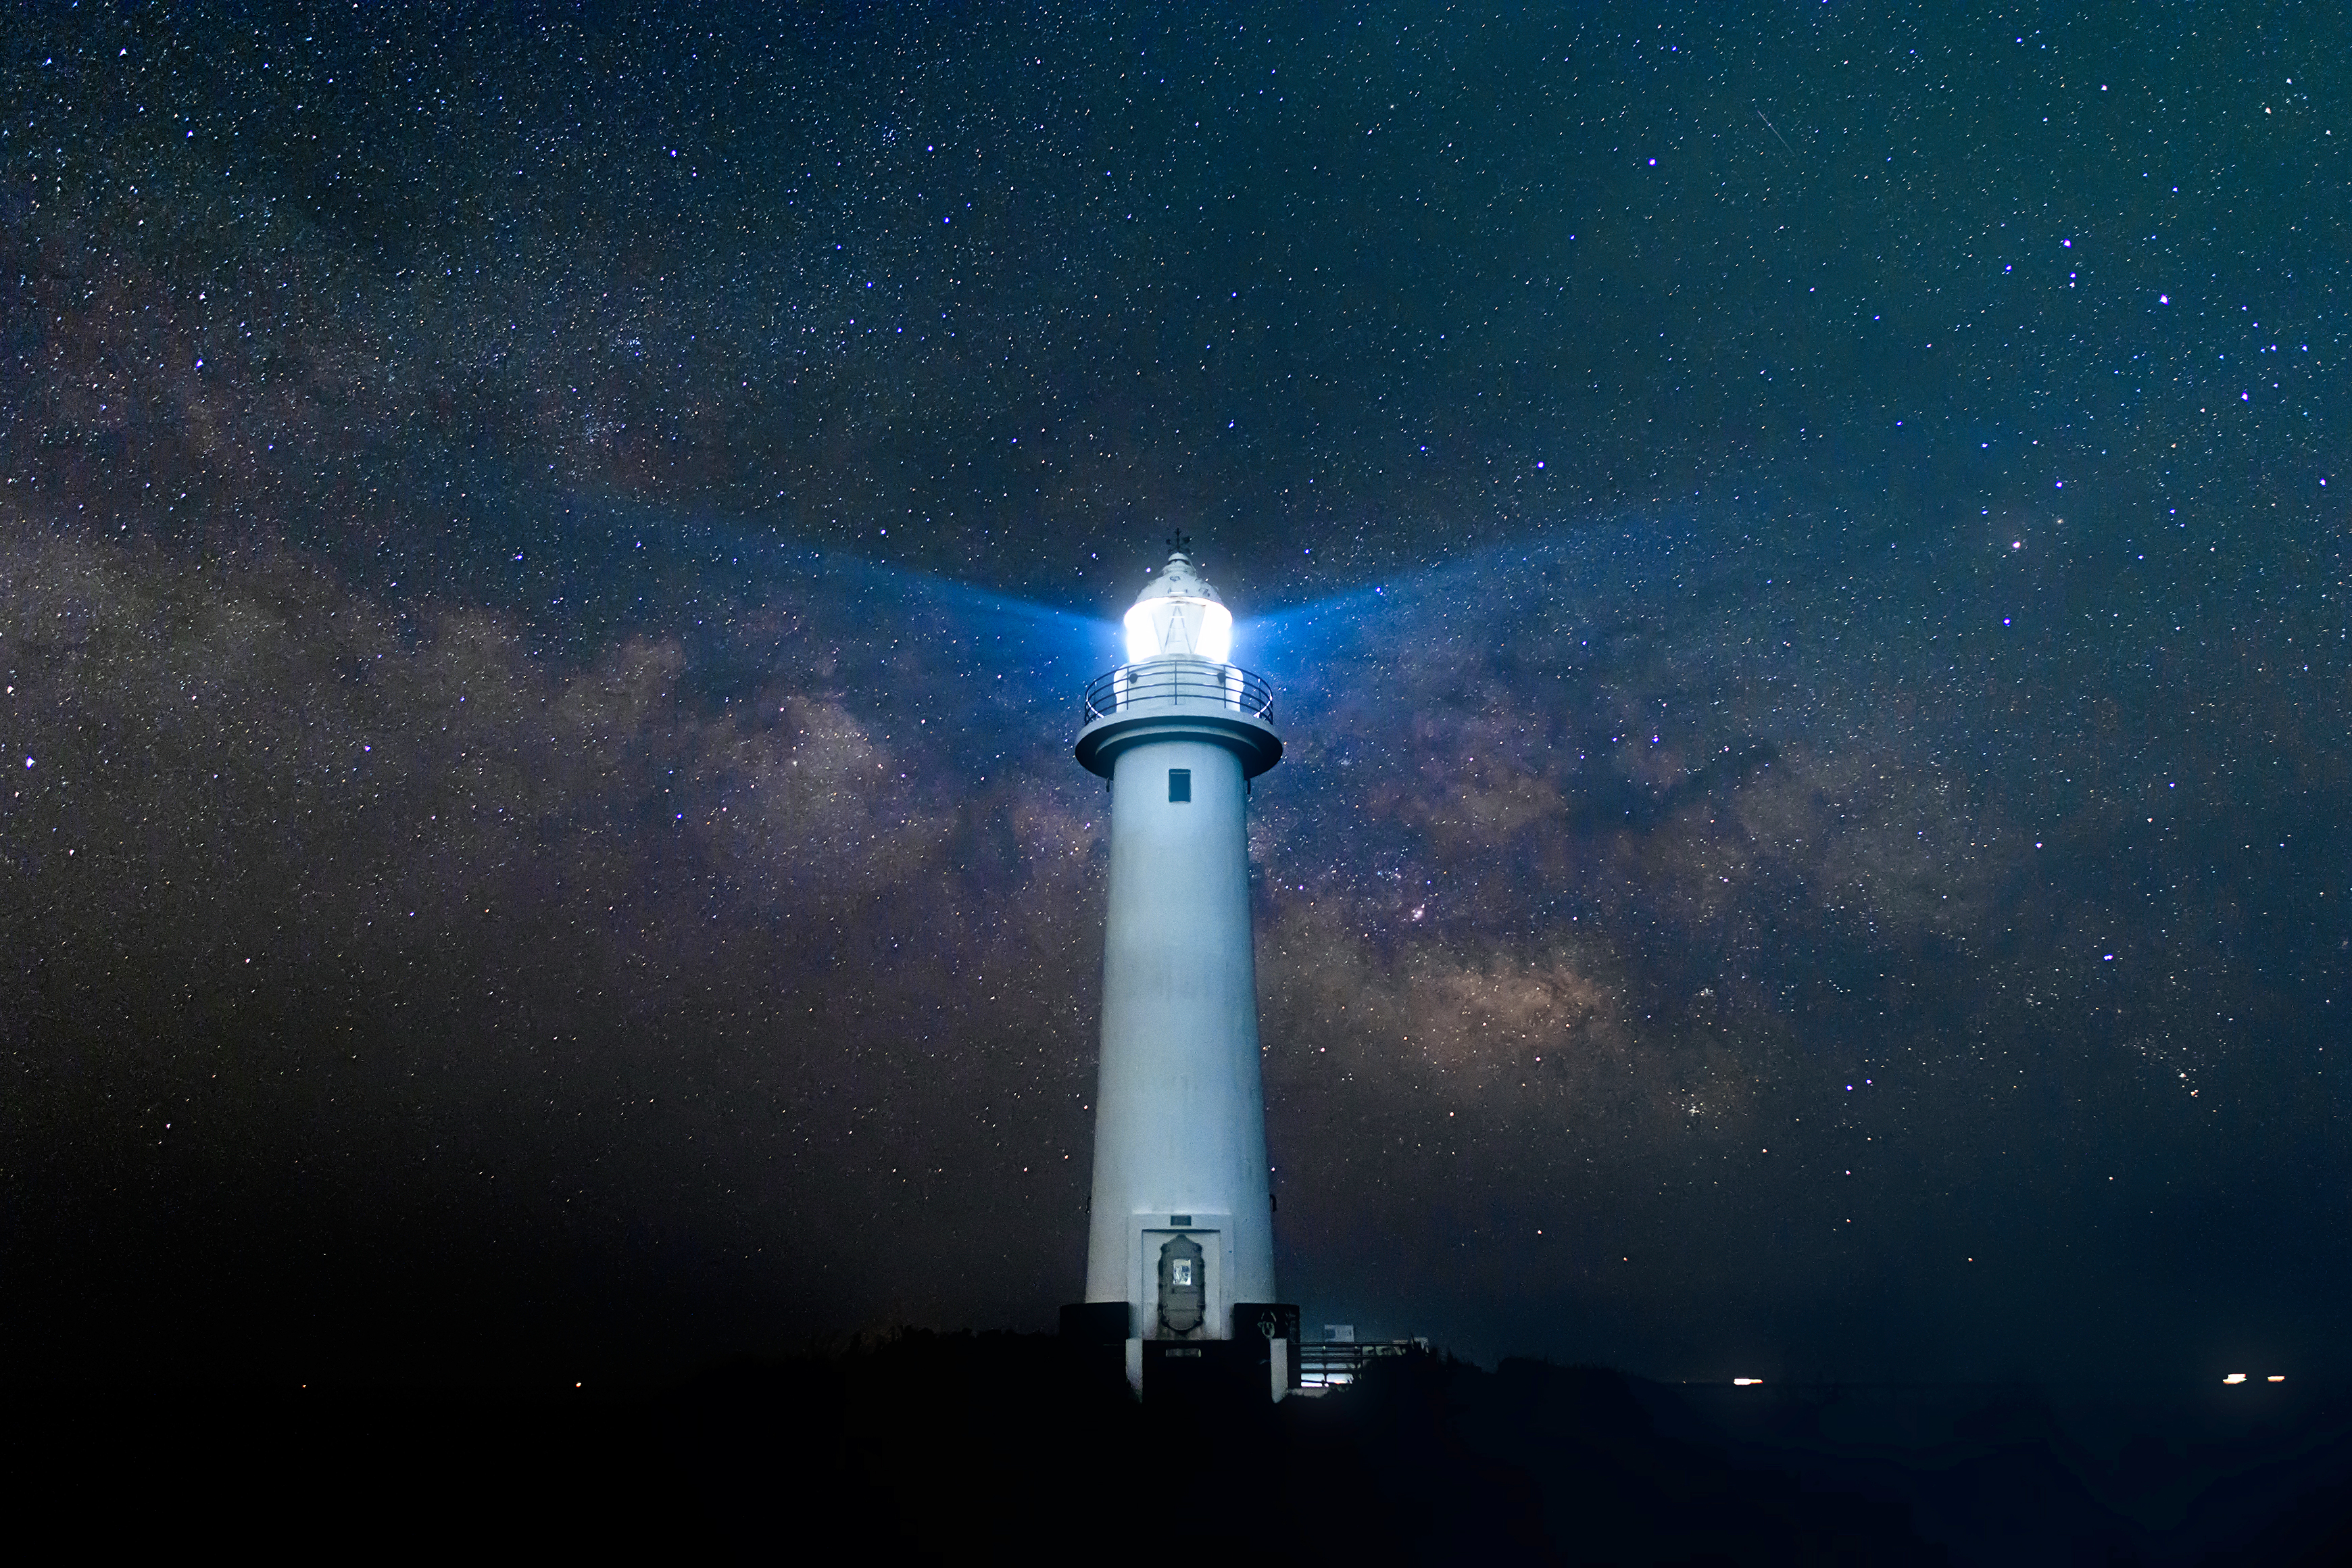 General 3480x2320 lighthouse stars building sky outdoors